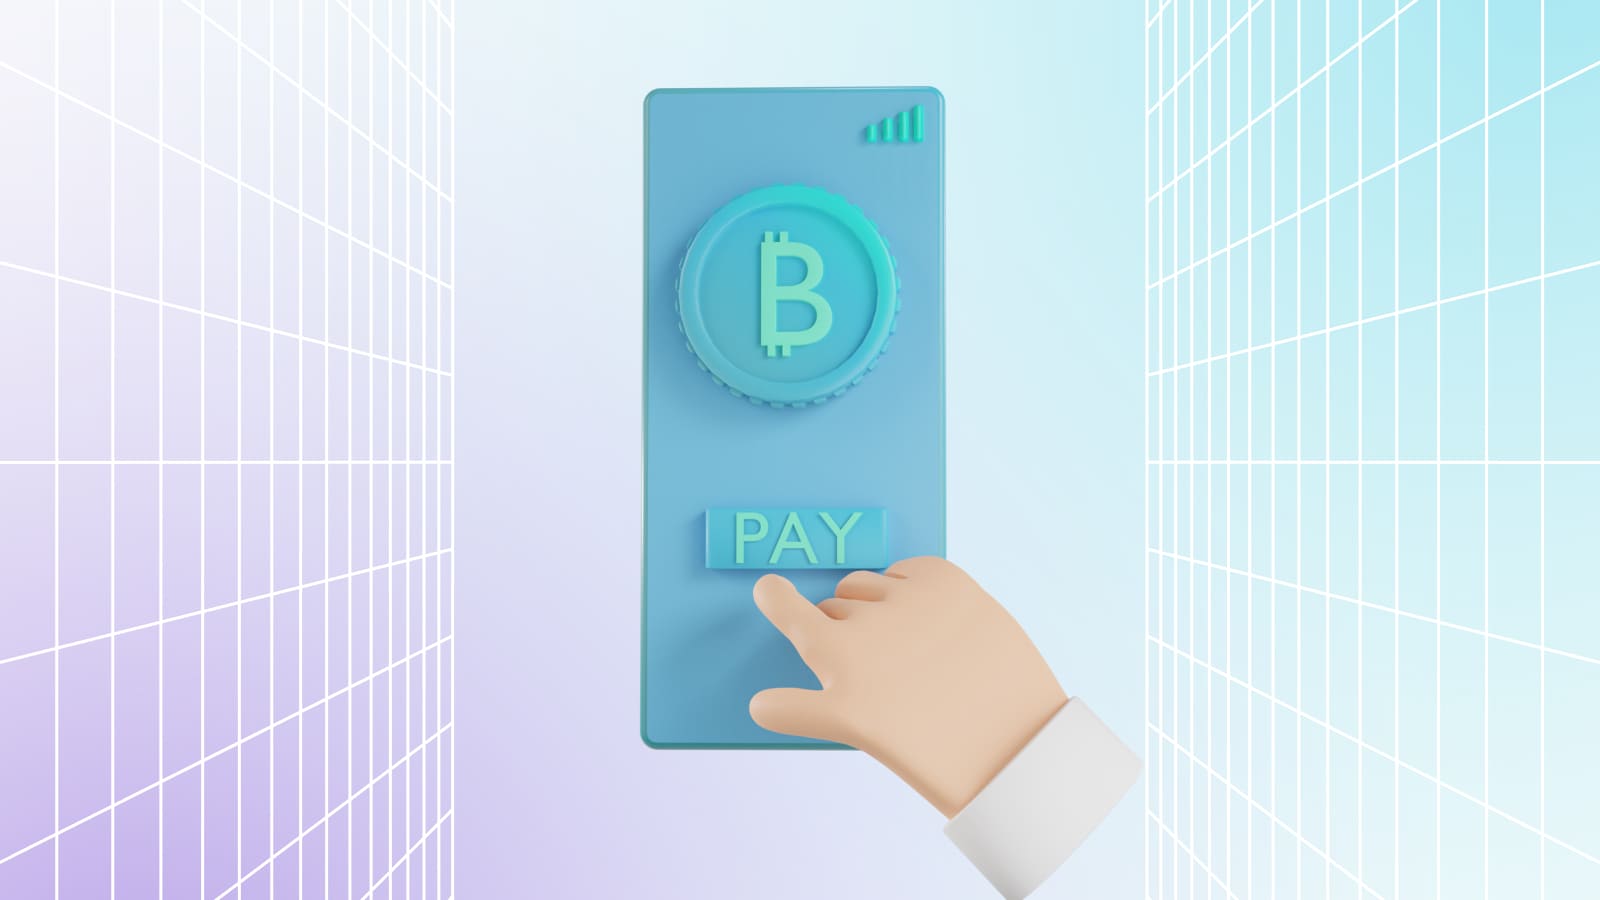 Cryptocurrency payment system processes transactions automatically.